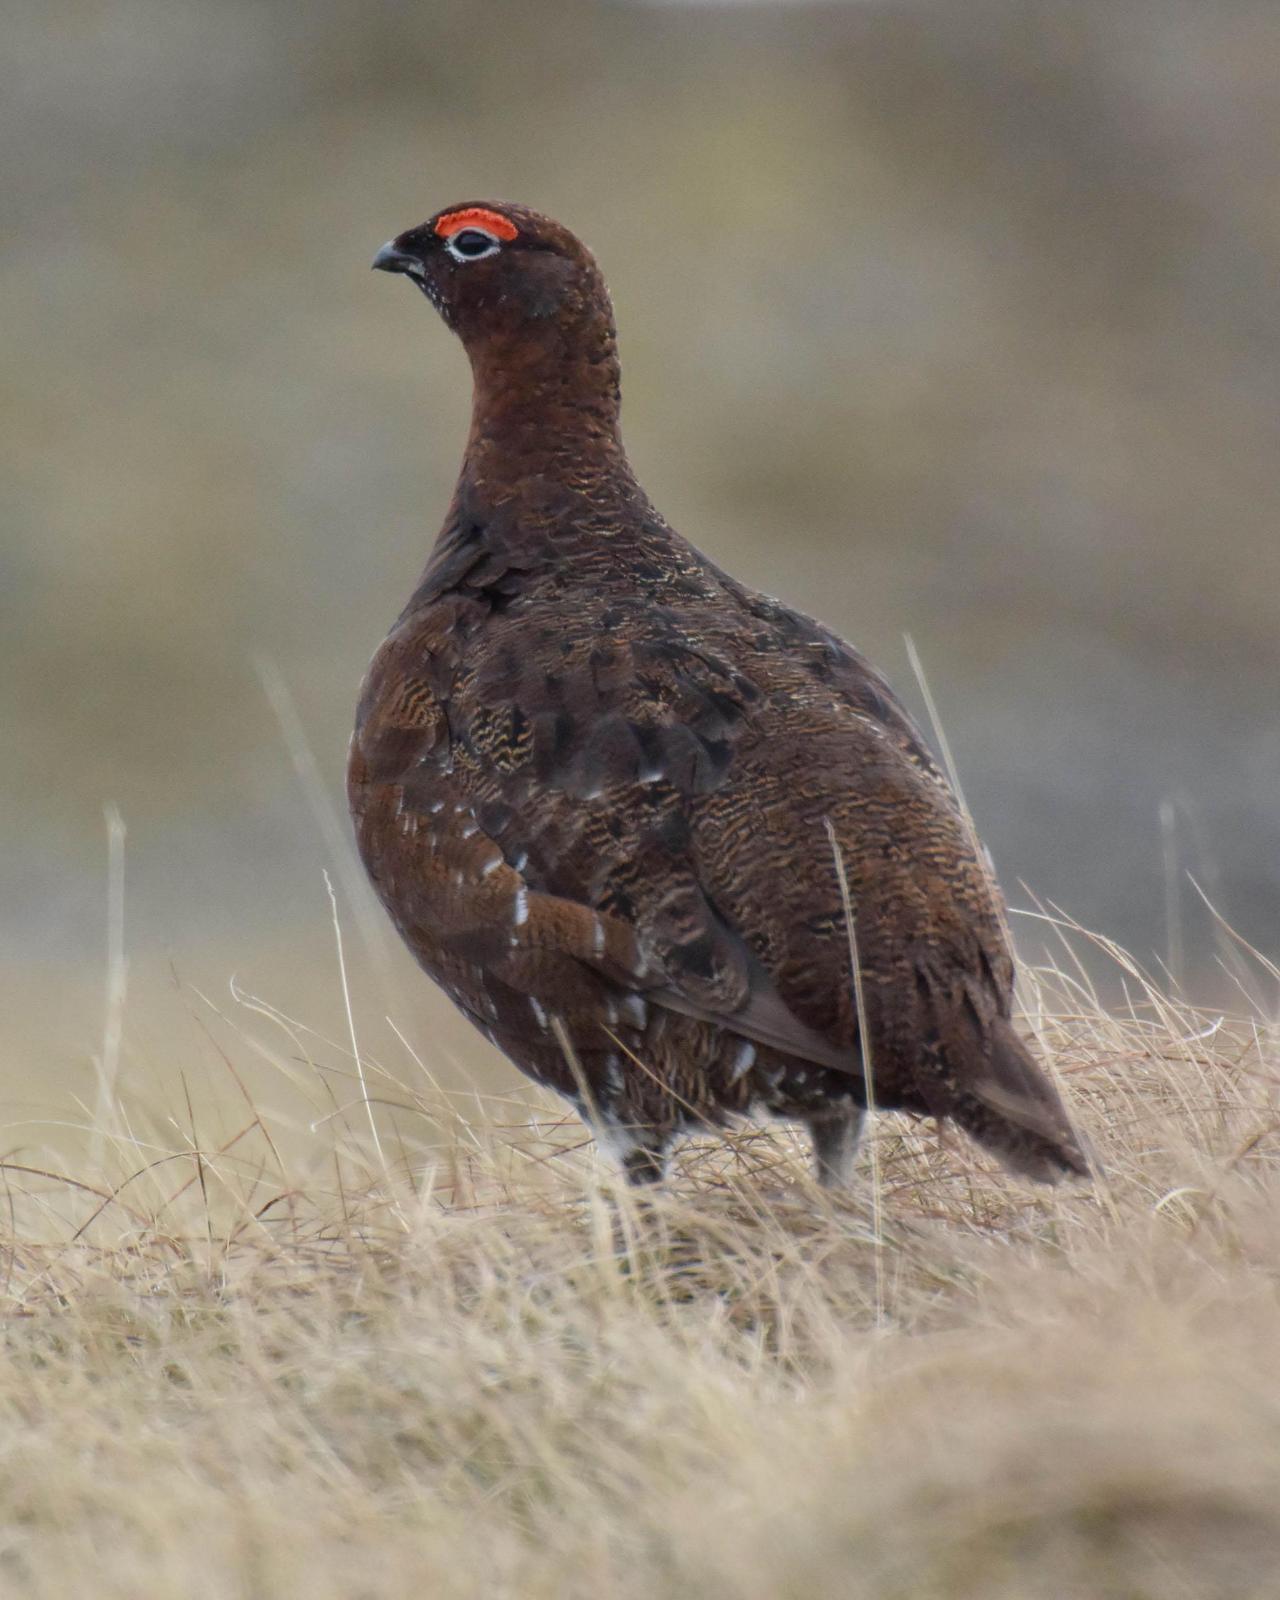 Willow Ptarmigan (Red Grouse) Photo by Steve Percival